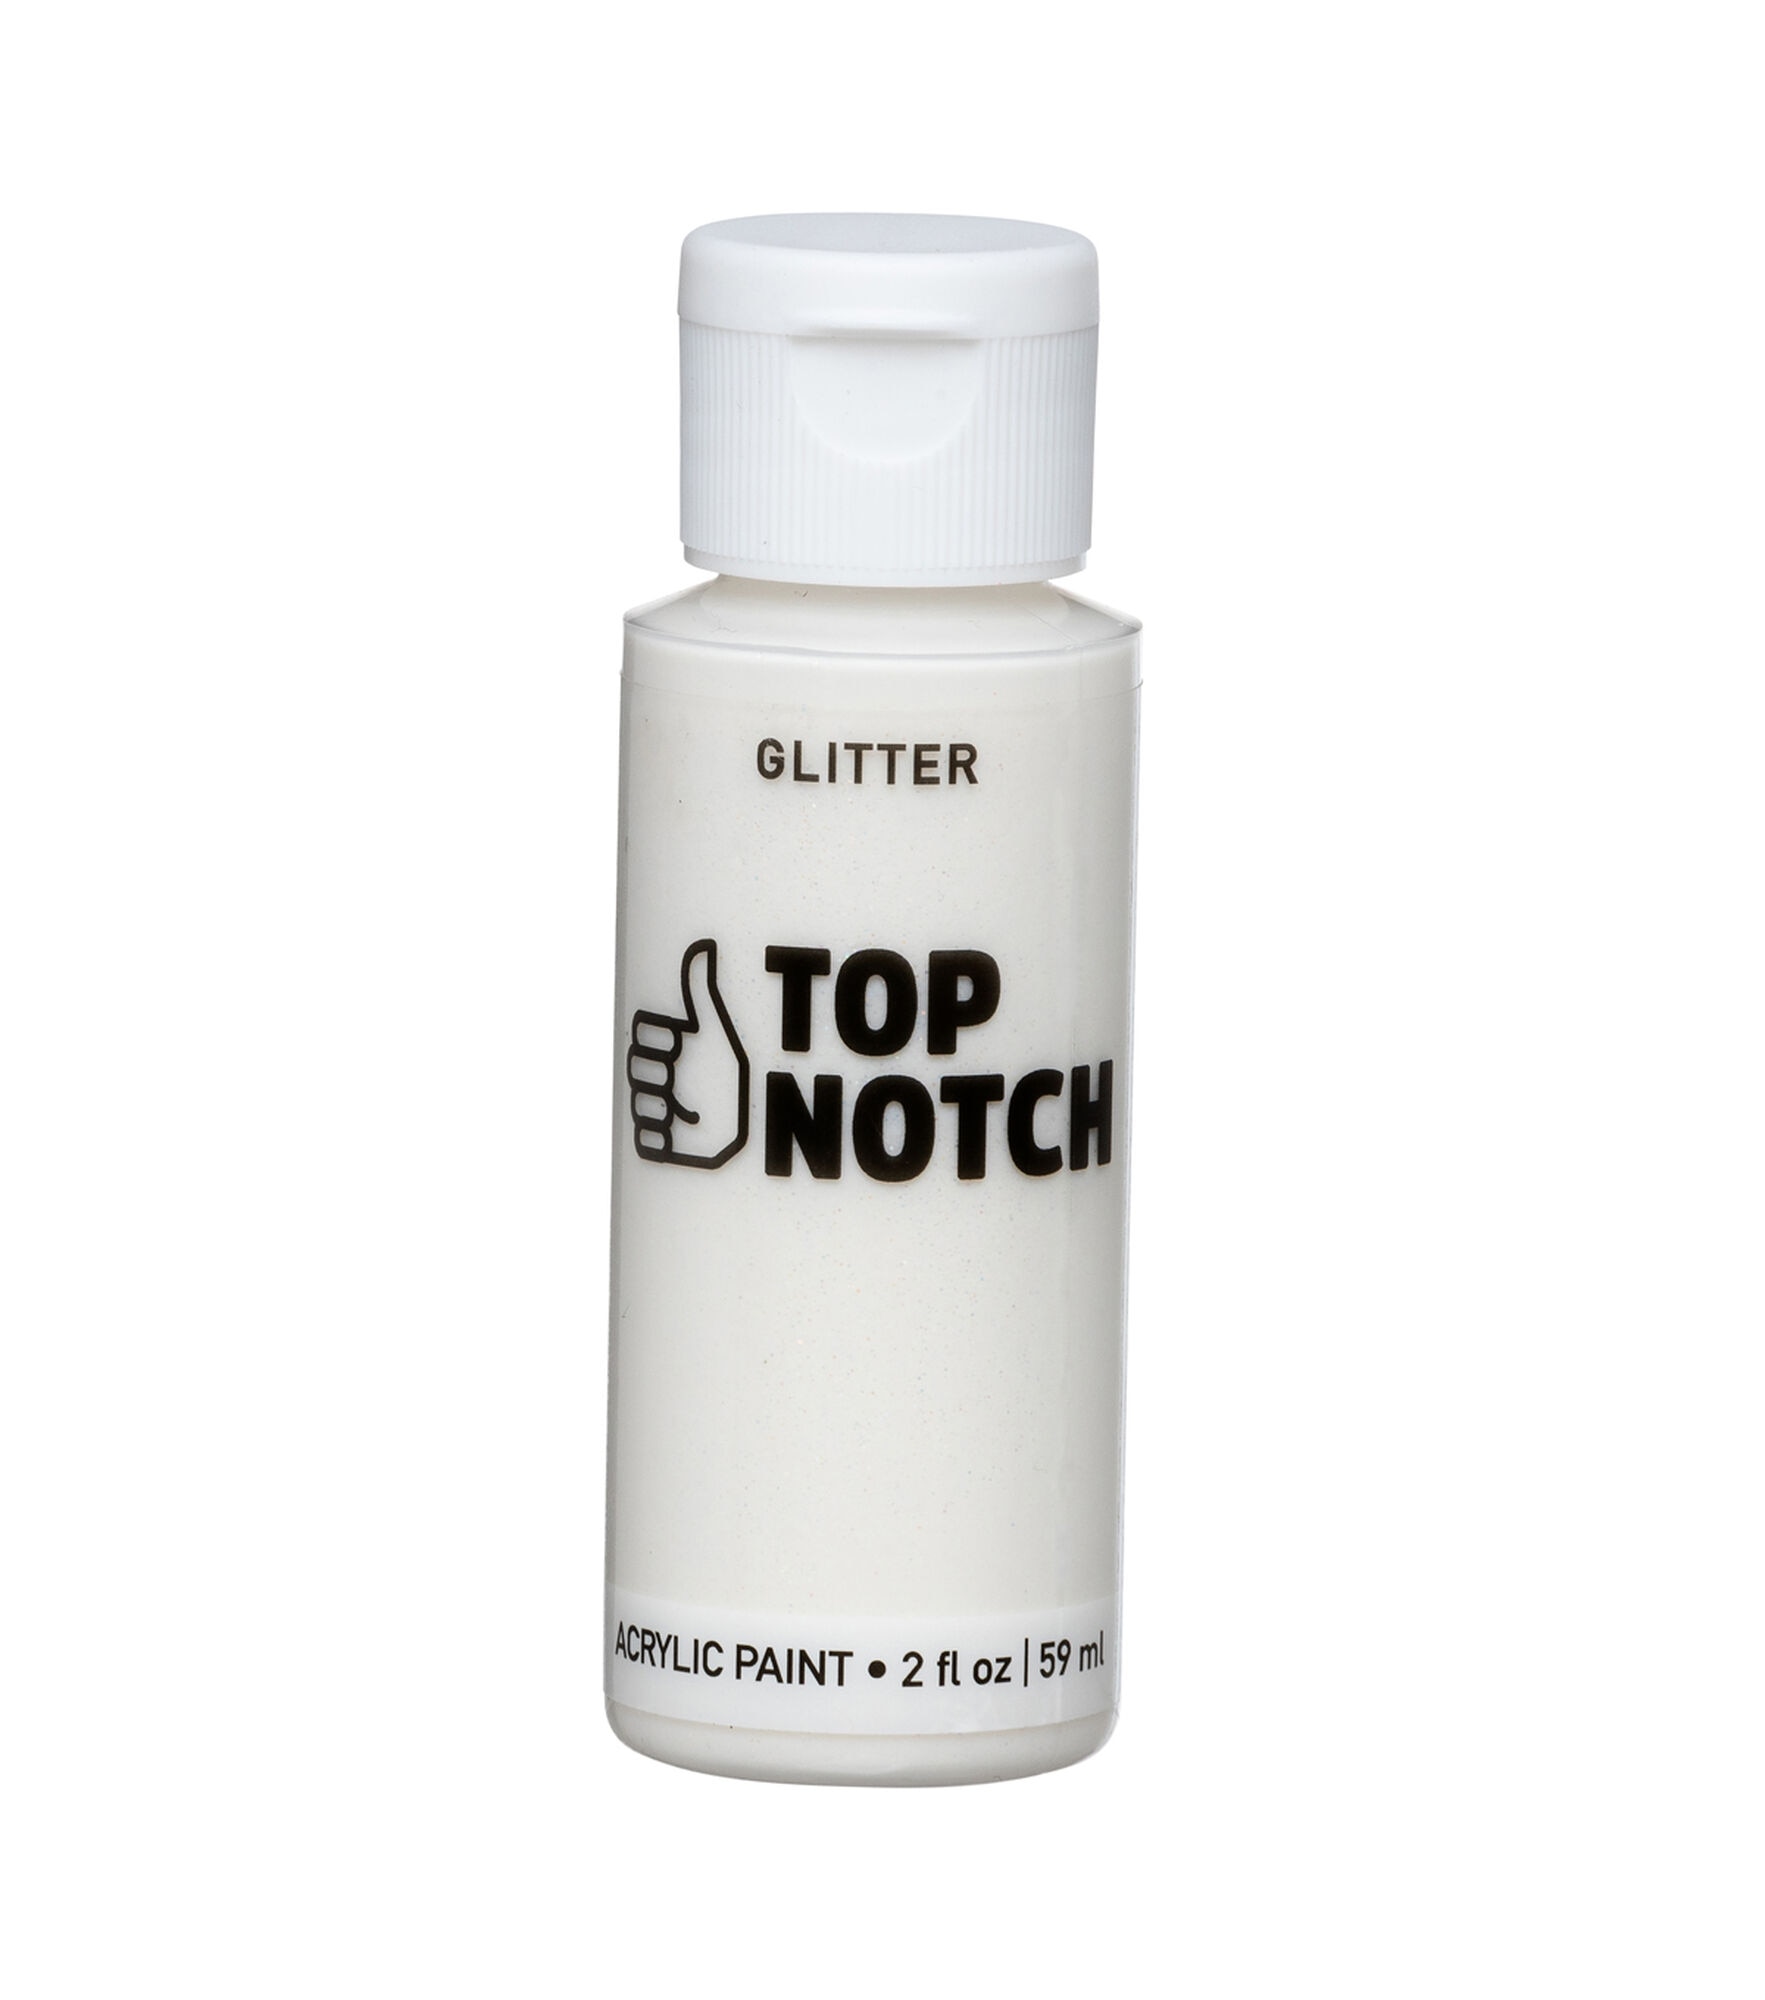 2oz White Glitter Acrylic Craft Paint by Top Notch, Crystal, hi-res